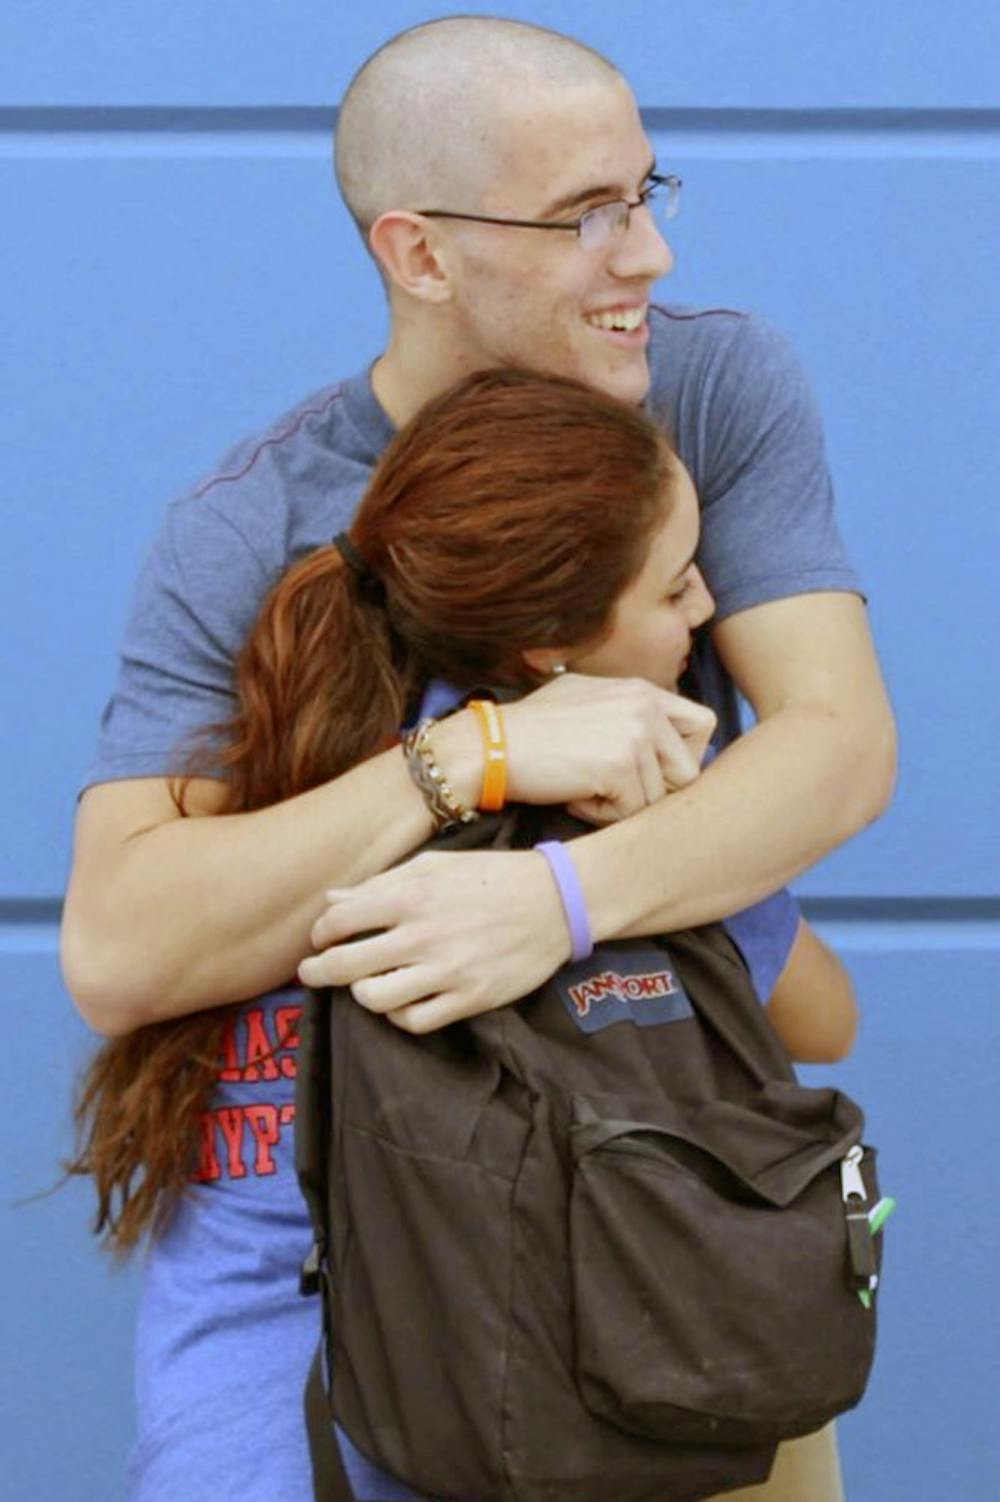 <p>Erika Atencio, a UF biology freshman, hugs her friend Ian Supra, who has battled stage 4 esophageal cancer for more than a year. After hearing of Supra’s diagnosis in January 2014, Atencio and a group of her friends raised money to offset Supra’s medical bills by selling “Supra Strong,” bracelets and T-shirts.</p>